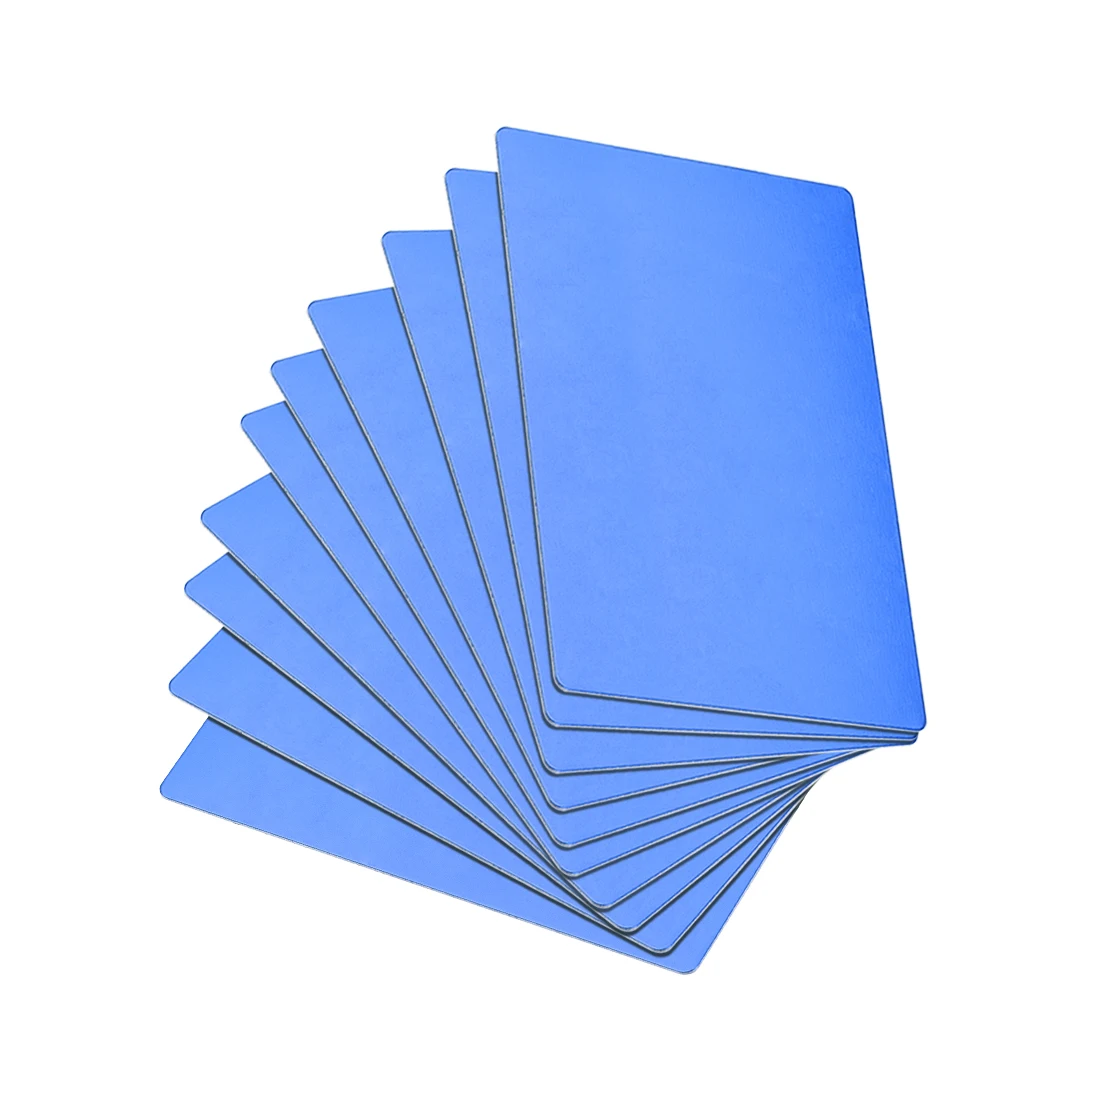 10Pcs Blank Metal Card 88x53x0.6mm Anodized Aluminum Plate for DIY Laser Printing Engraving Blue/Red 20 sheets 0 7mm a5 blank sublimation metal plate aluminium sheet name card printing sublimation ink transfer diy craft 150 200mm